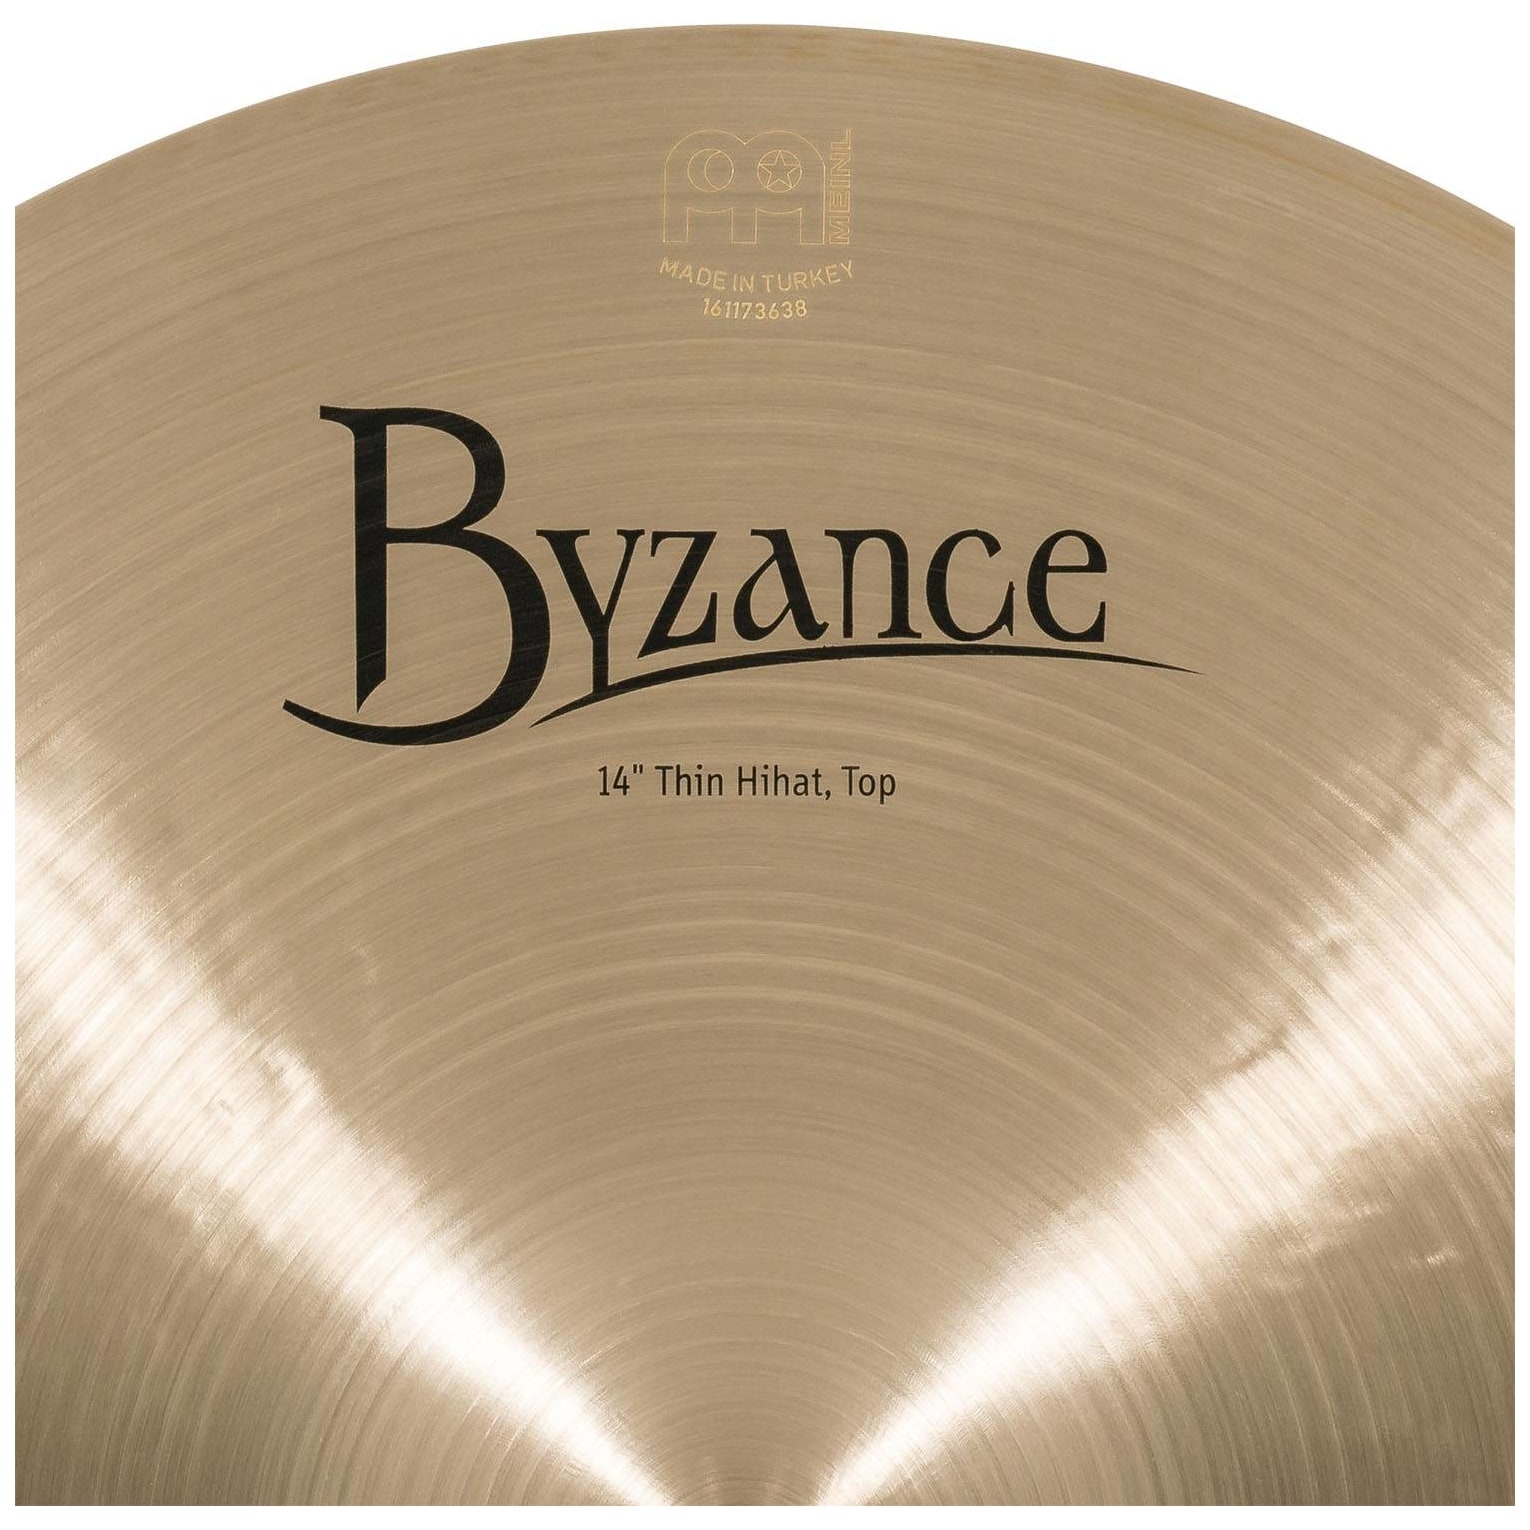 Meinl Cymbals B14TH - 14" Byzance Traditional  Thin Hihat 